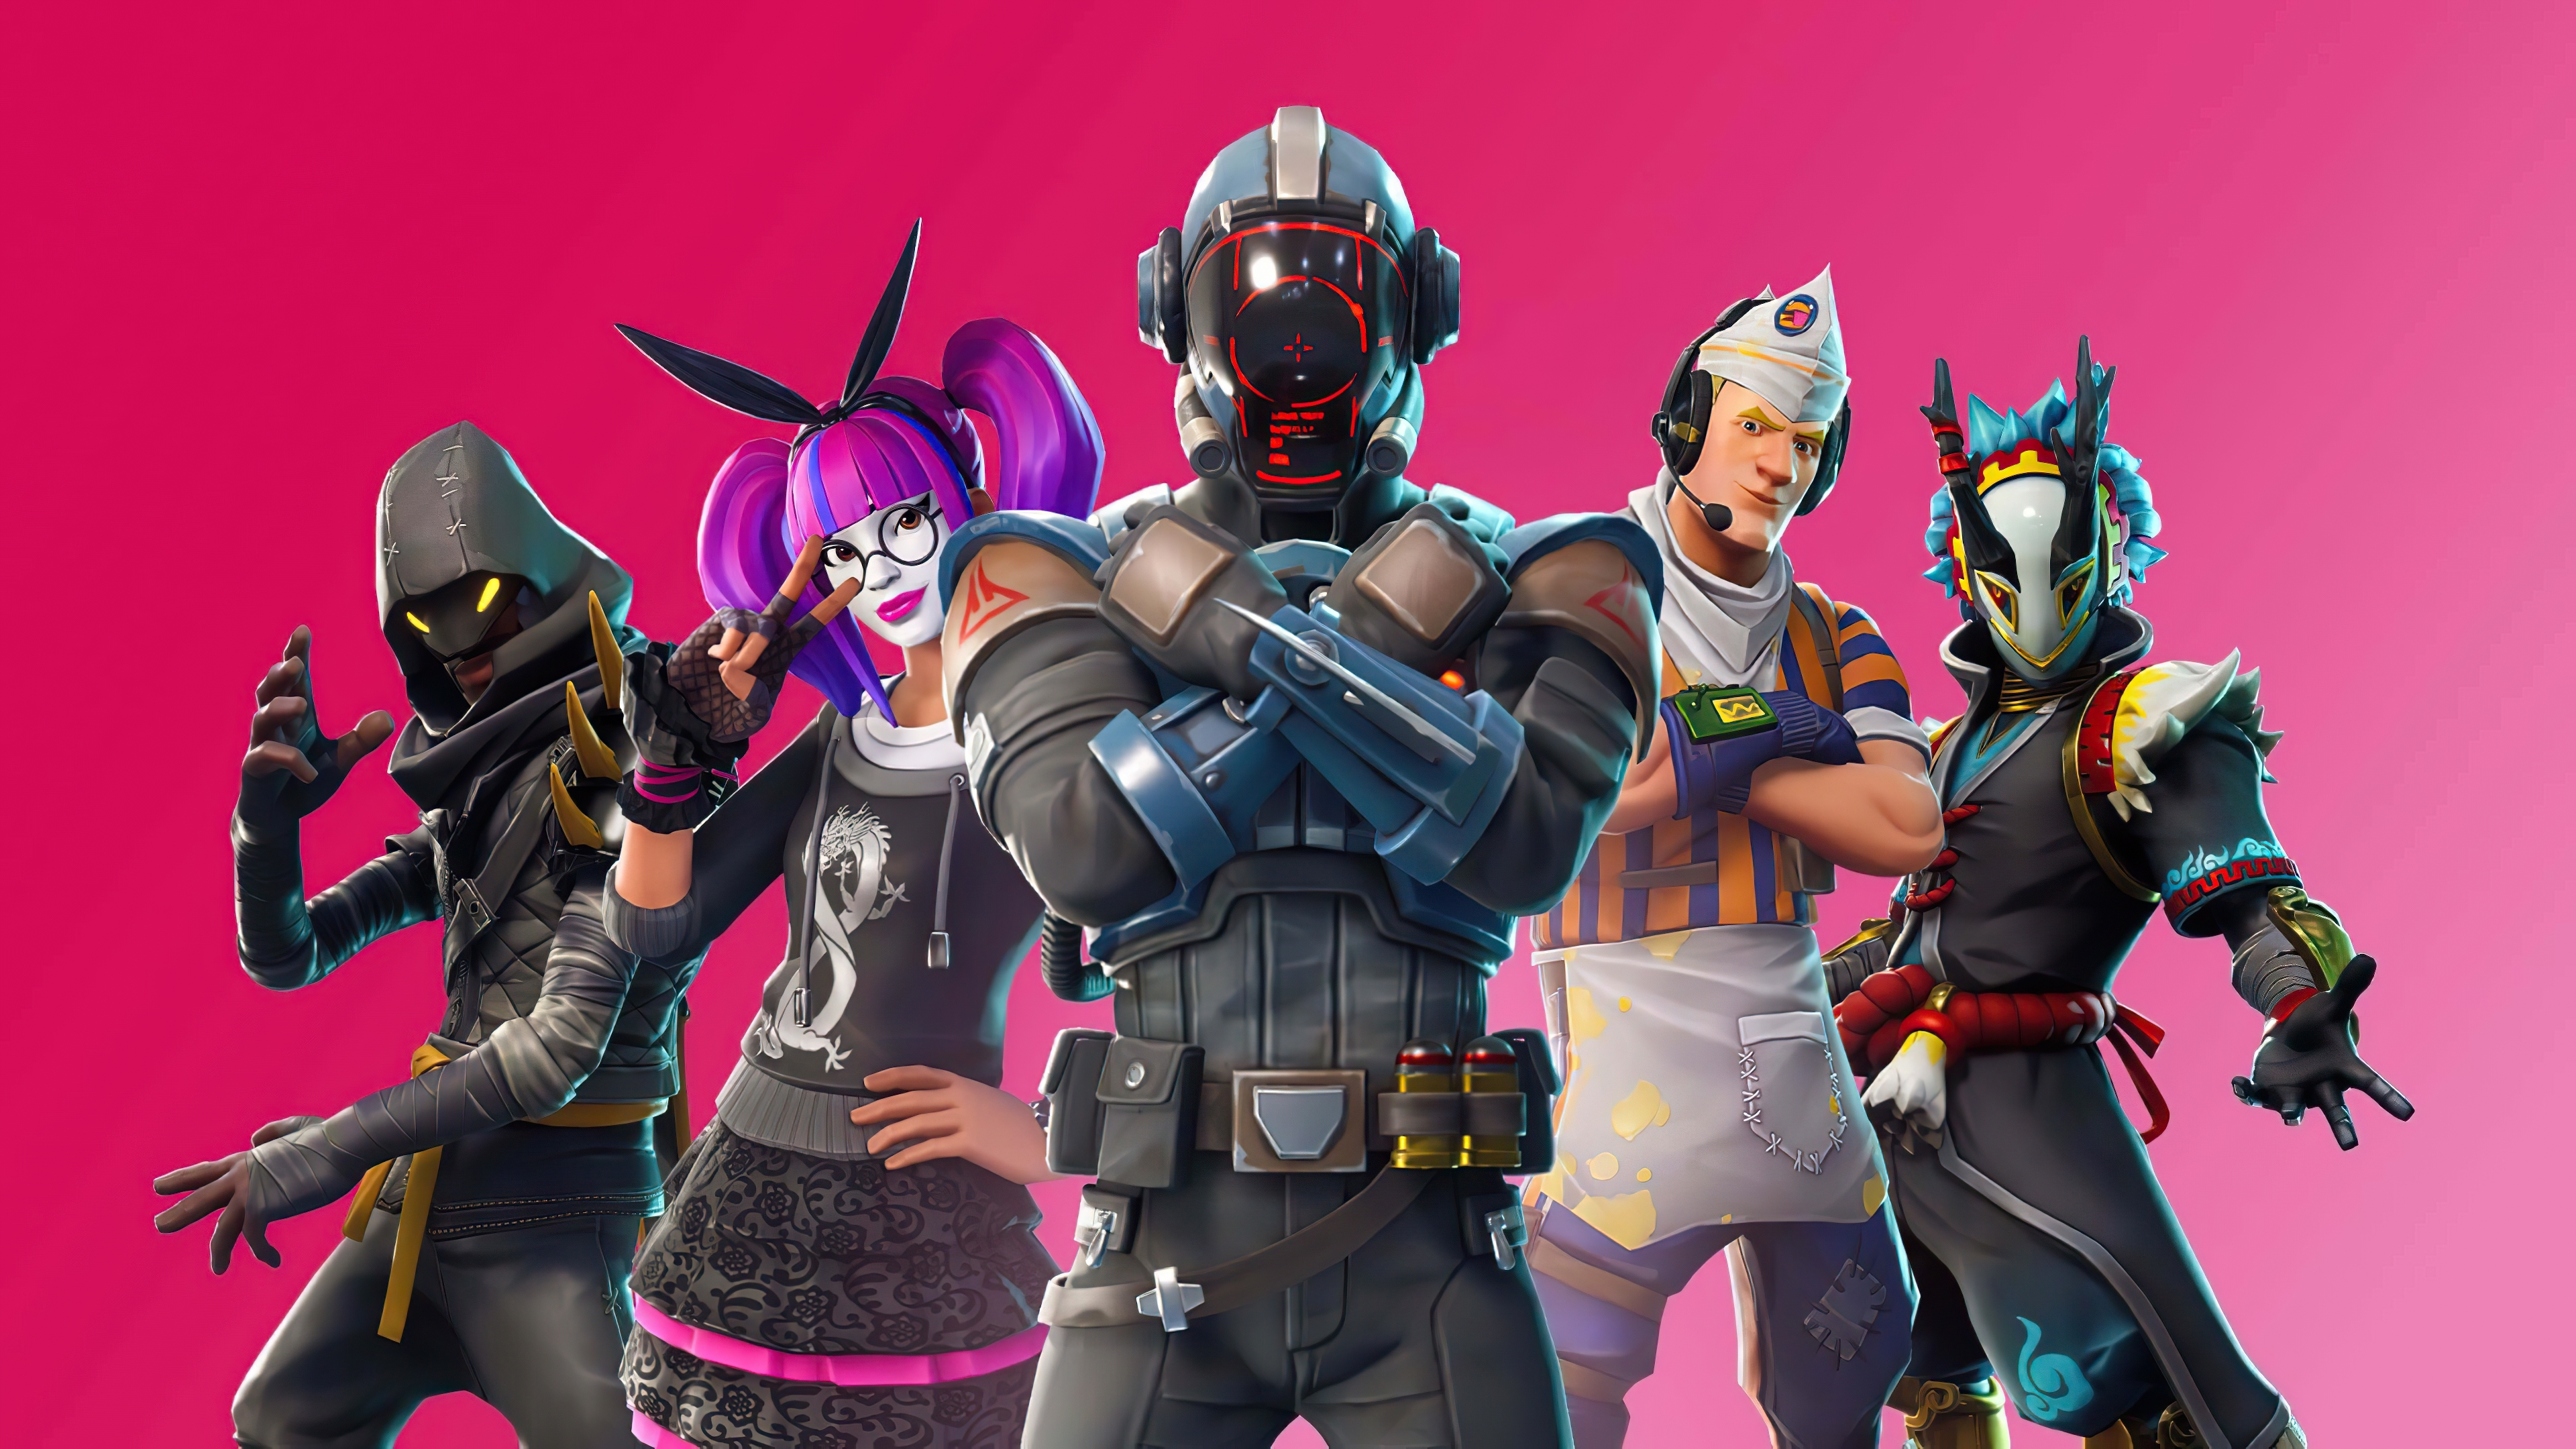 MrBeast Partners with eFuse to Host Accessible Fortnite Tournament